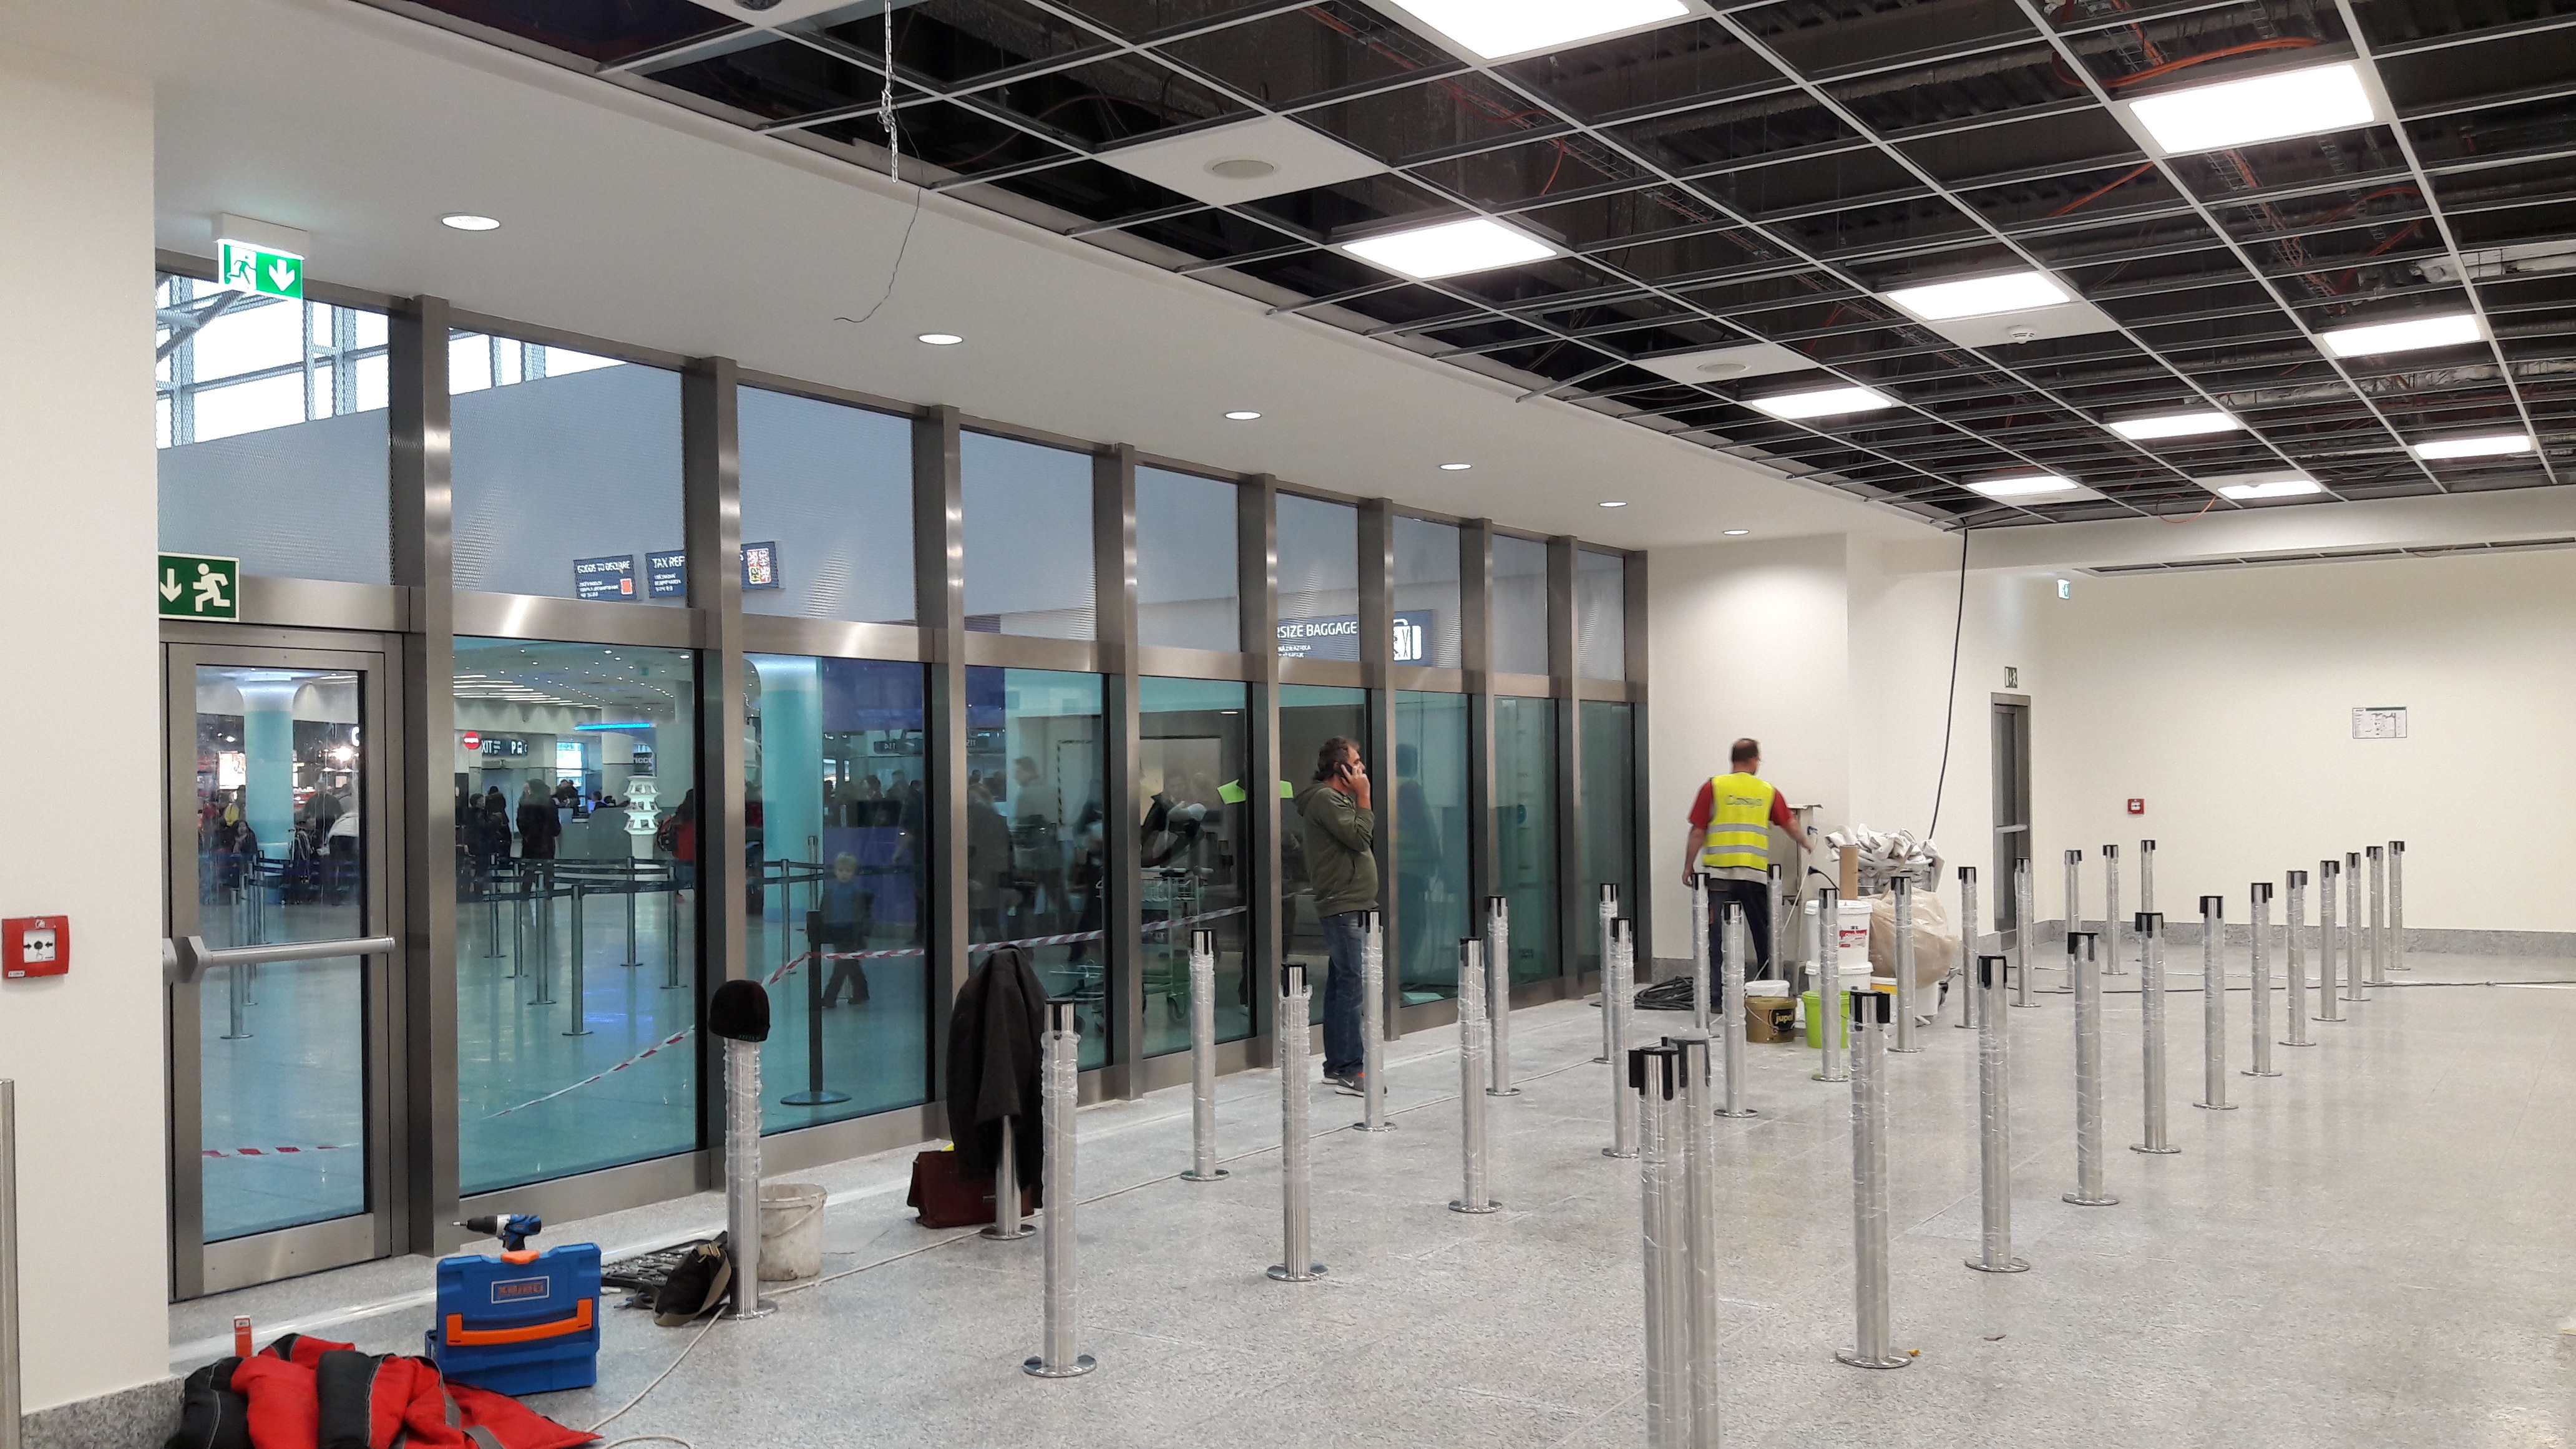 Prague airport equipped with lightweight transparent laminente windows